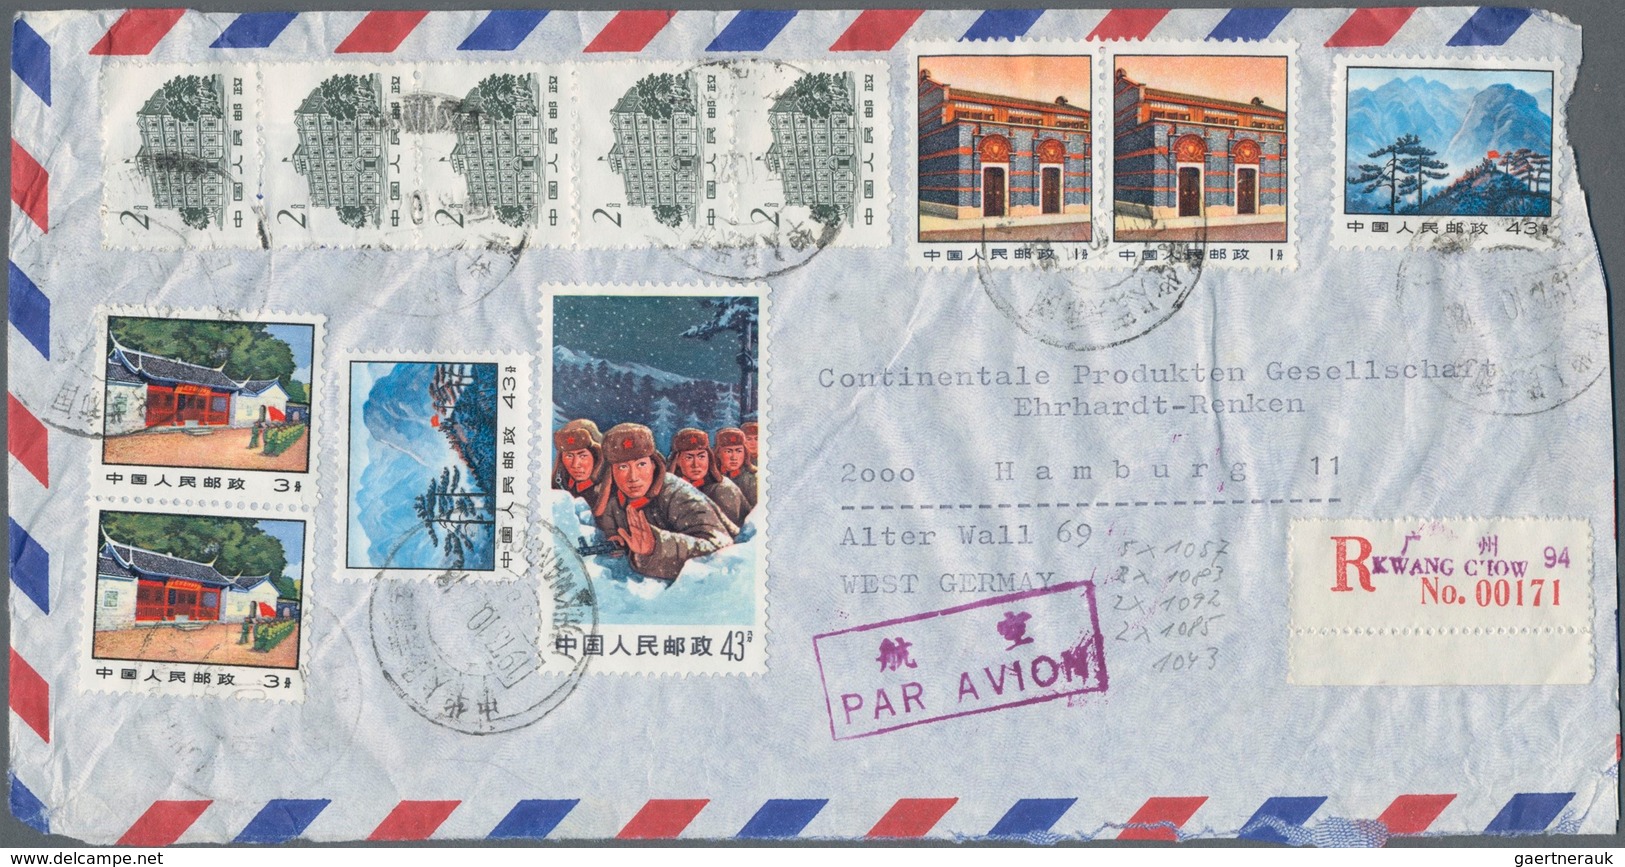 China - Volksrepublik: 1956/75 (ca.), foreign parcell bulletins (5, to Belgium), covers (30) or used